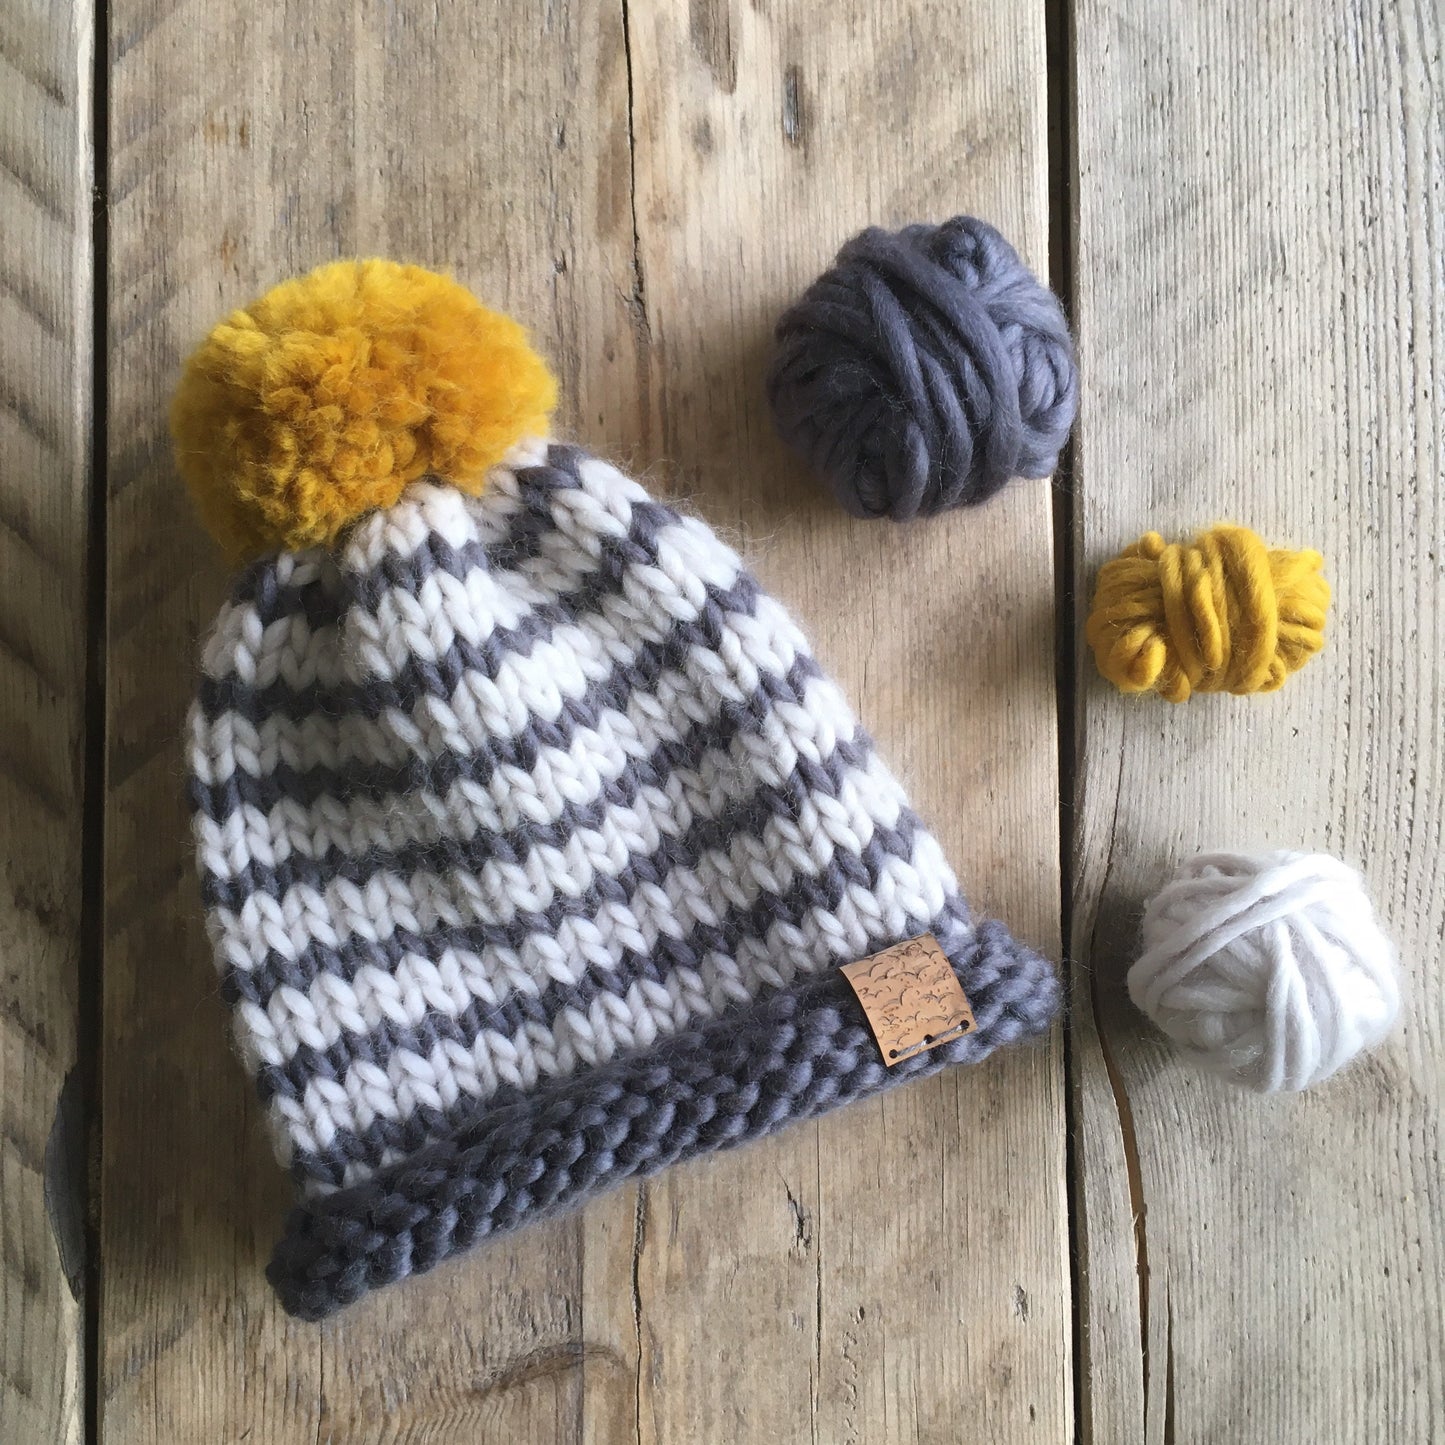 Bobble Hat | baby size | striped grey and yellow | merino wool handknit hat